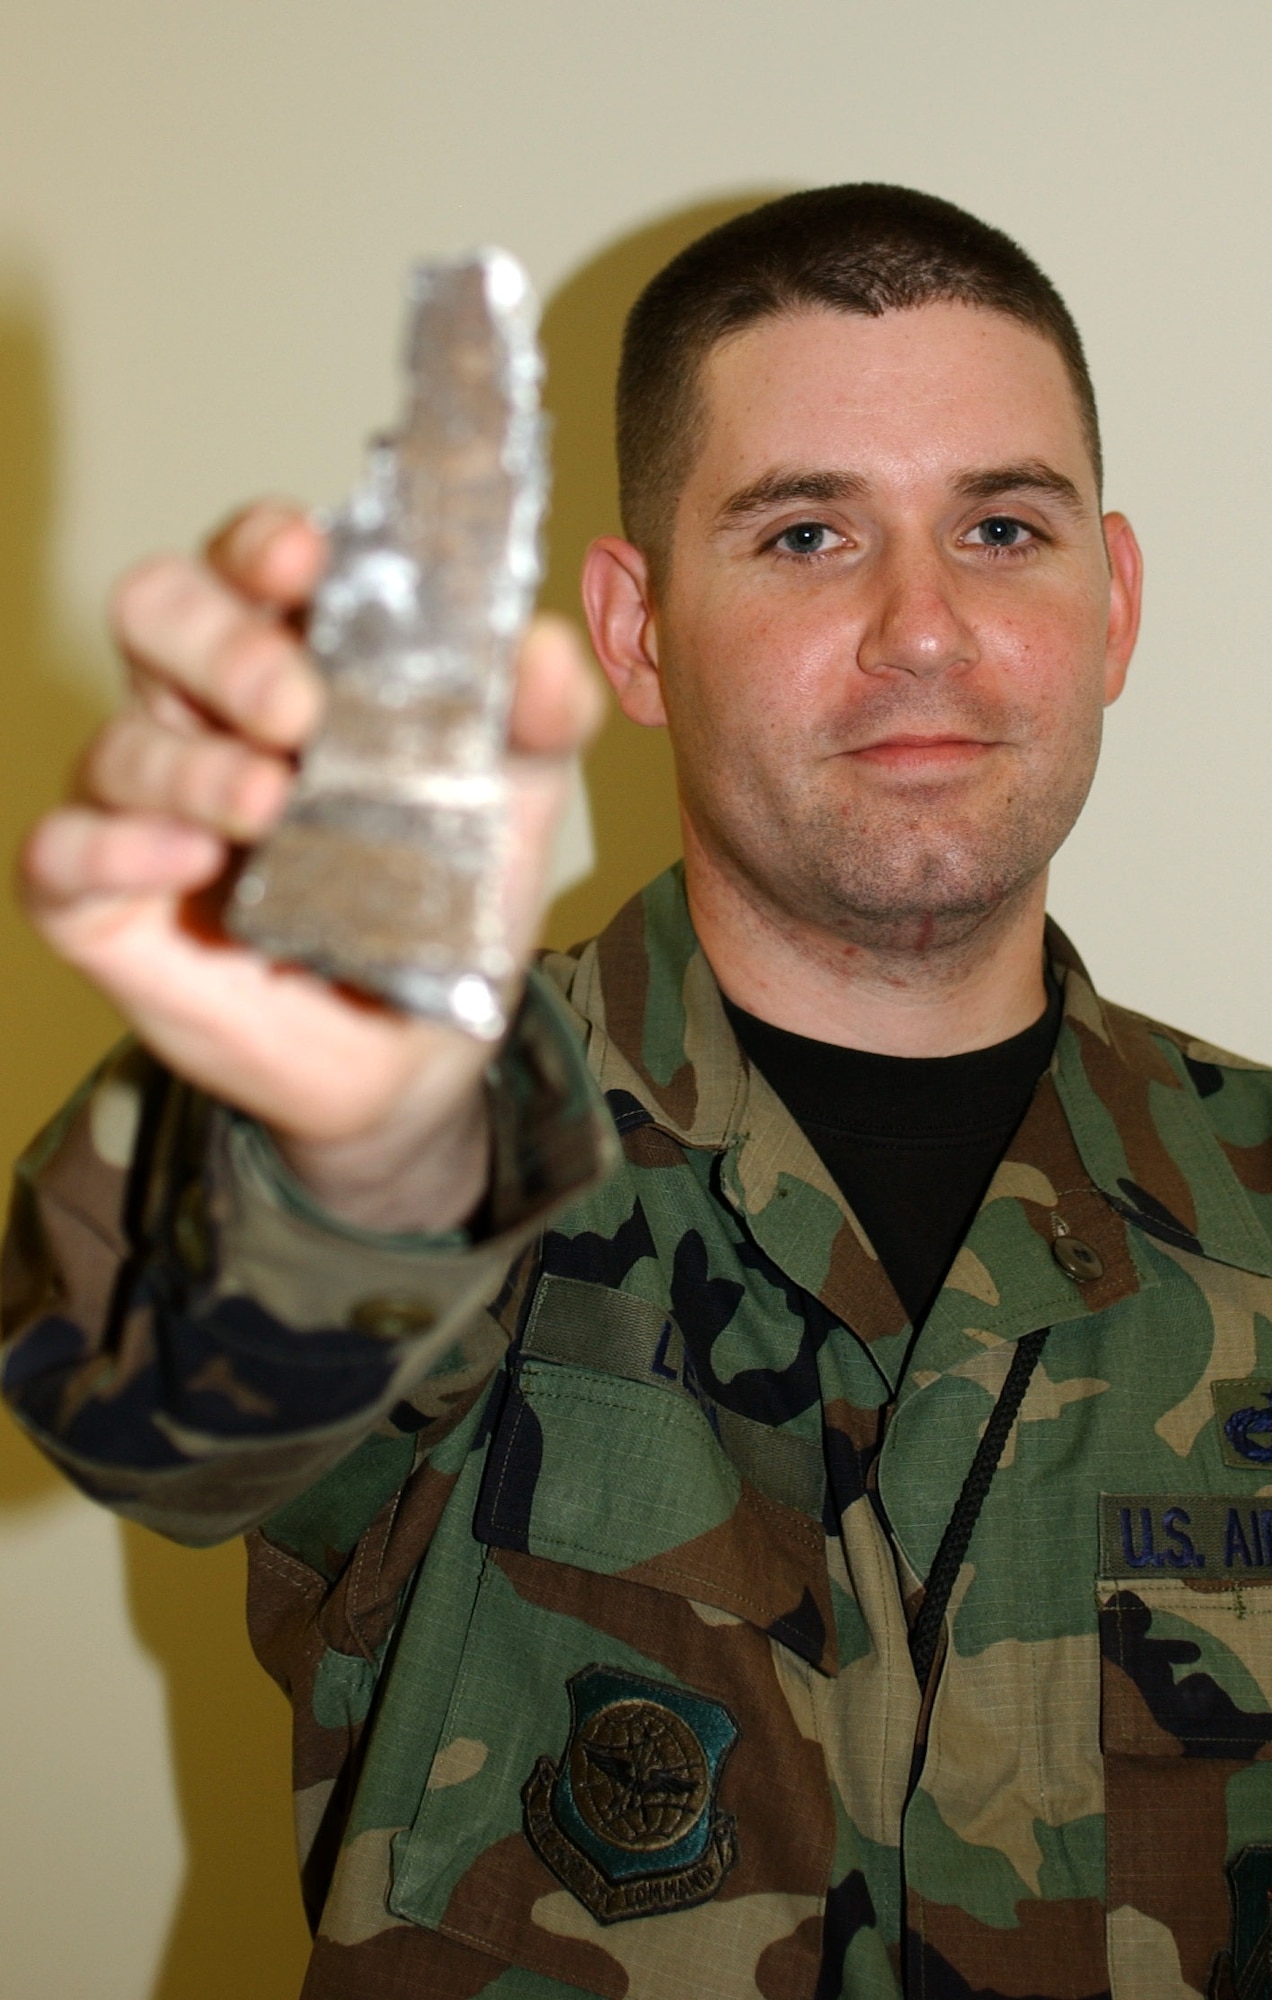 Staff Sgt. Chris Lelm holds up a piece of shrapnel found in his vehicle after a roadside bomb, made from a 155 mm artillery shell, exploded next to his truck in Iraq. Sergeant Lelm was one of many Airmen performing convoy duties in support of Operation Iraqi Freedom. Sergeant Lelm was presented the Purple Heart for his wounds. He is assigned to the 319th Logistics Readiness Squadron at Grand Forks Air Force Base, N.D. (U.S. Air Force photo/Airman 1st Class Ashley Coomes)